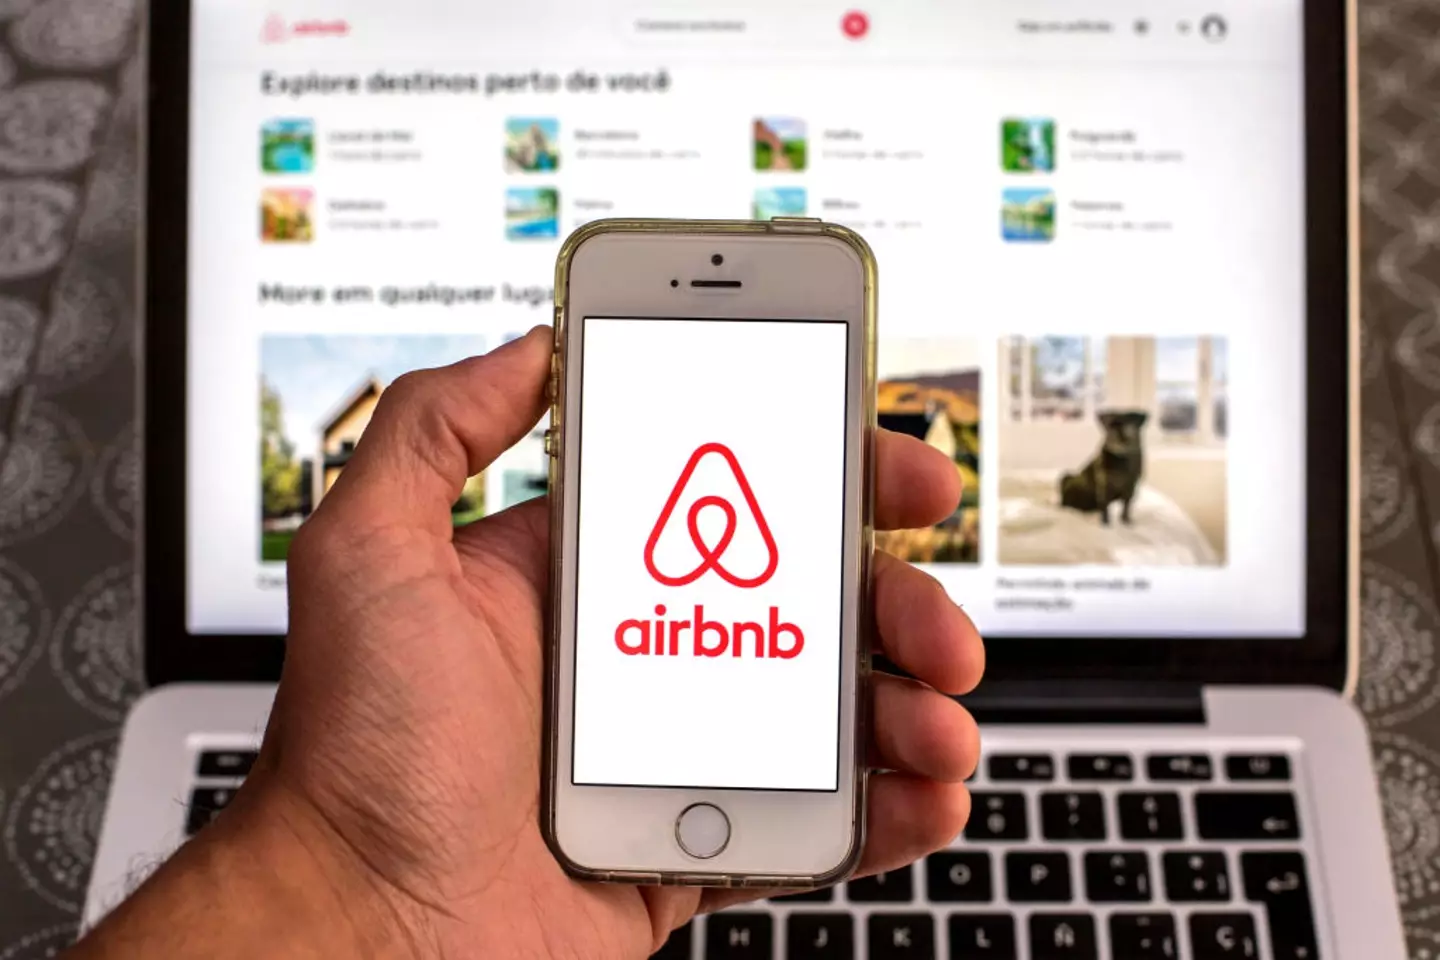 Airbnb is known for beautiful and unique properties all across the world, but it can get pretty expensive.